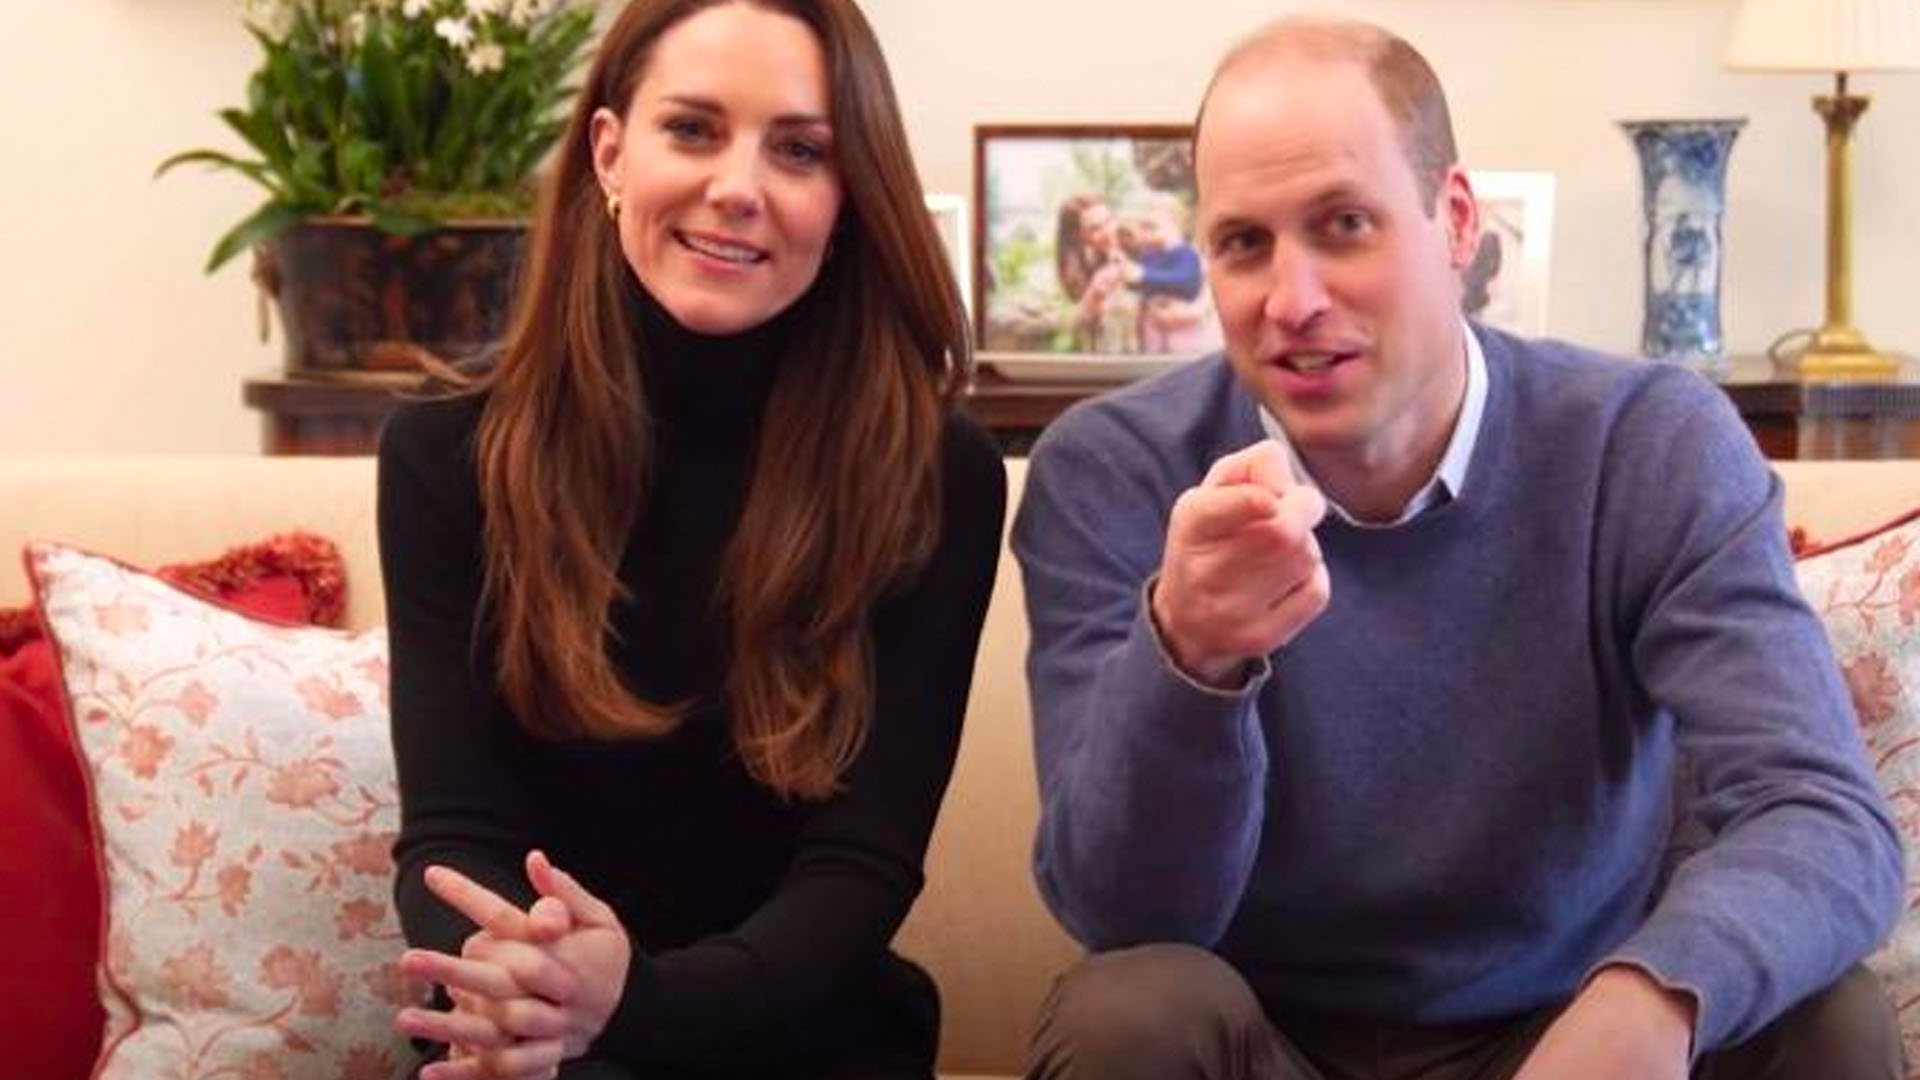 Duke and Duchess of Cambridge launch a YouTube channel